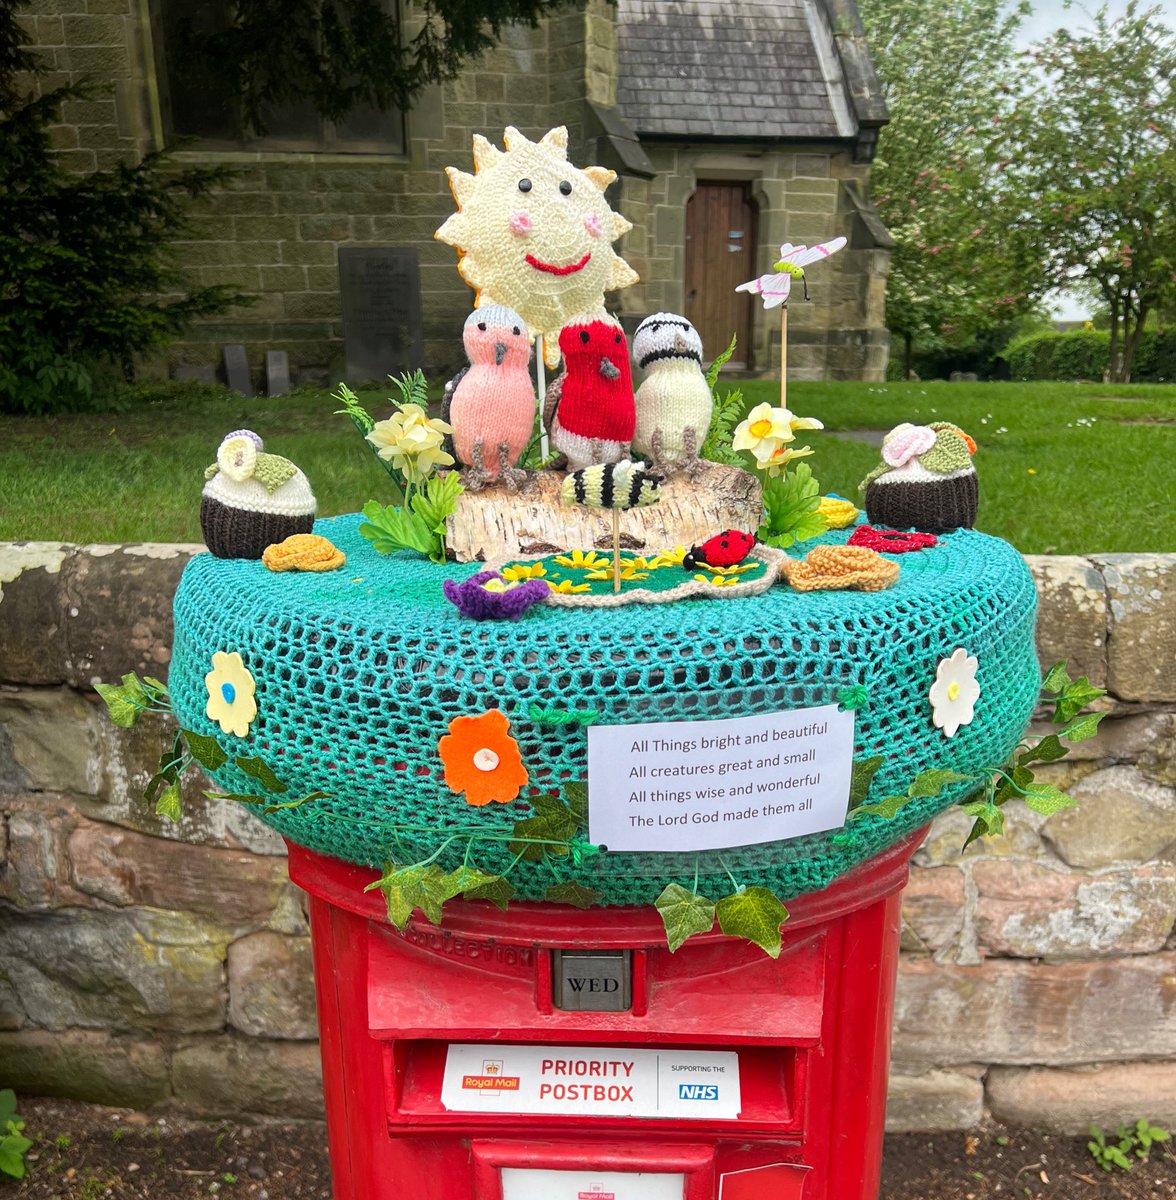 #PostboxSaturday  seen in a village we regularly go through.